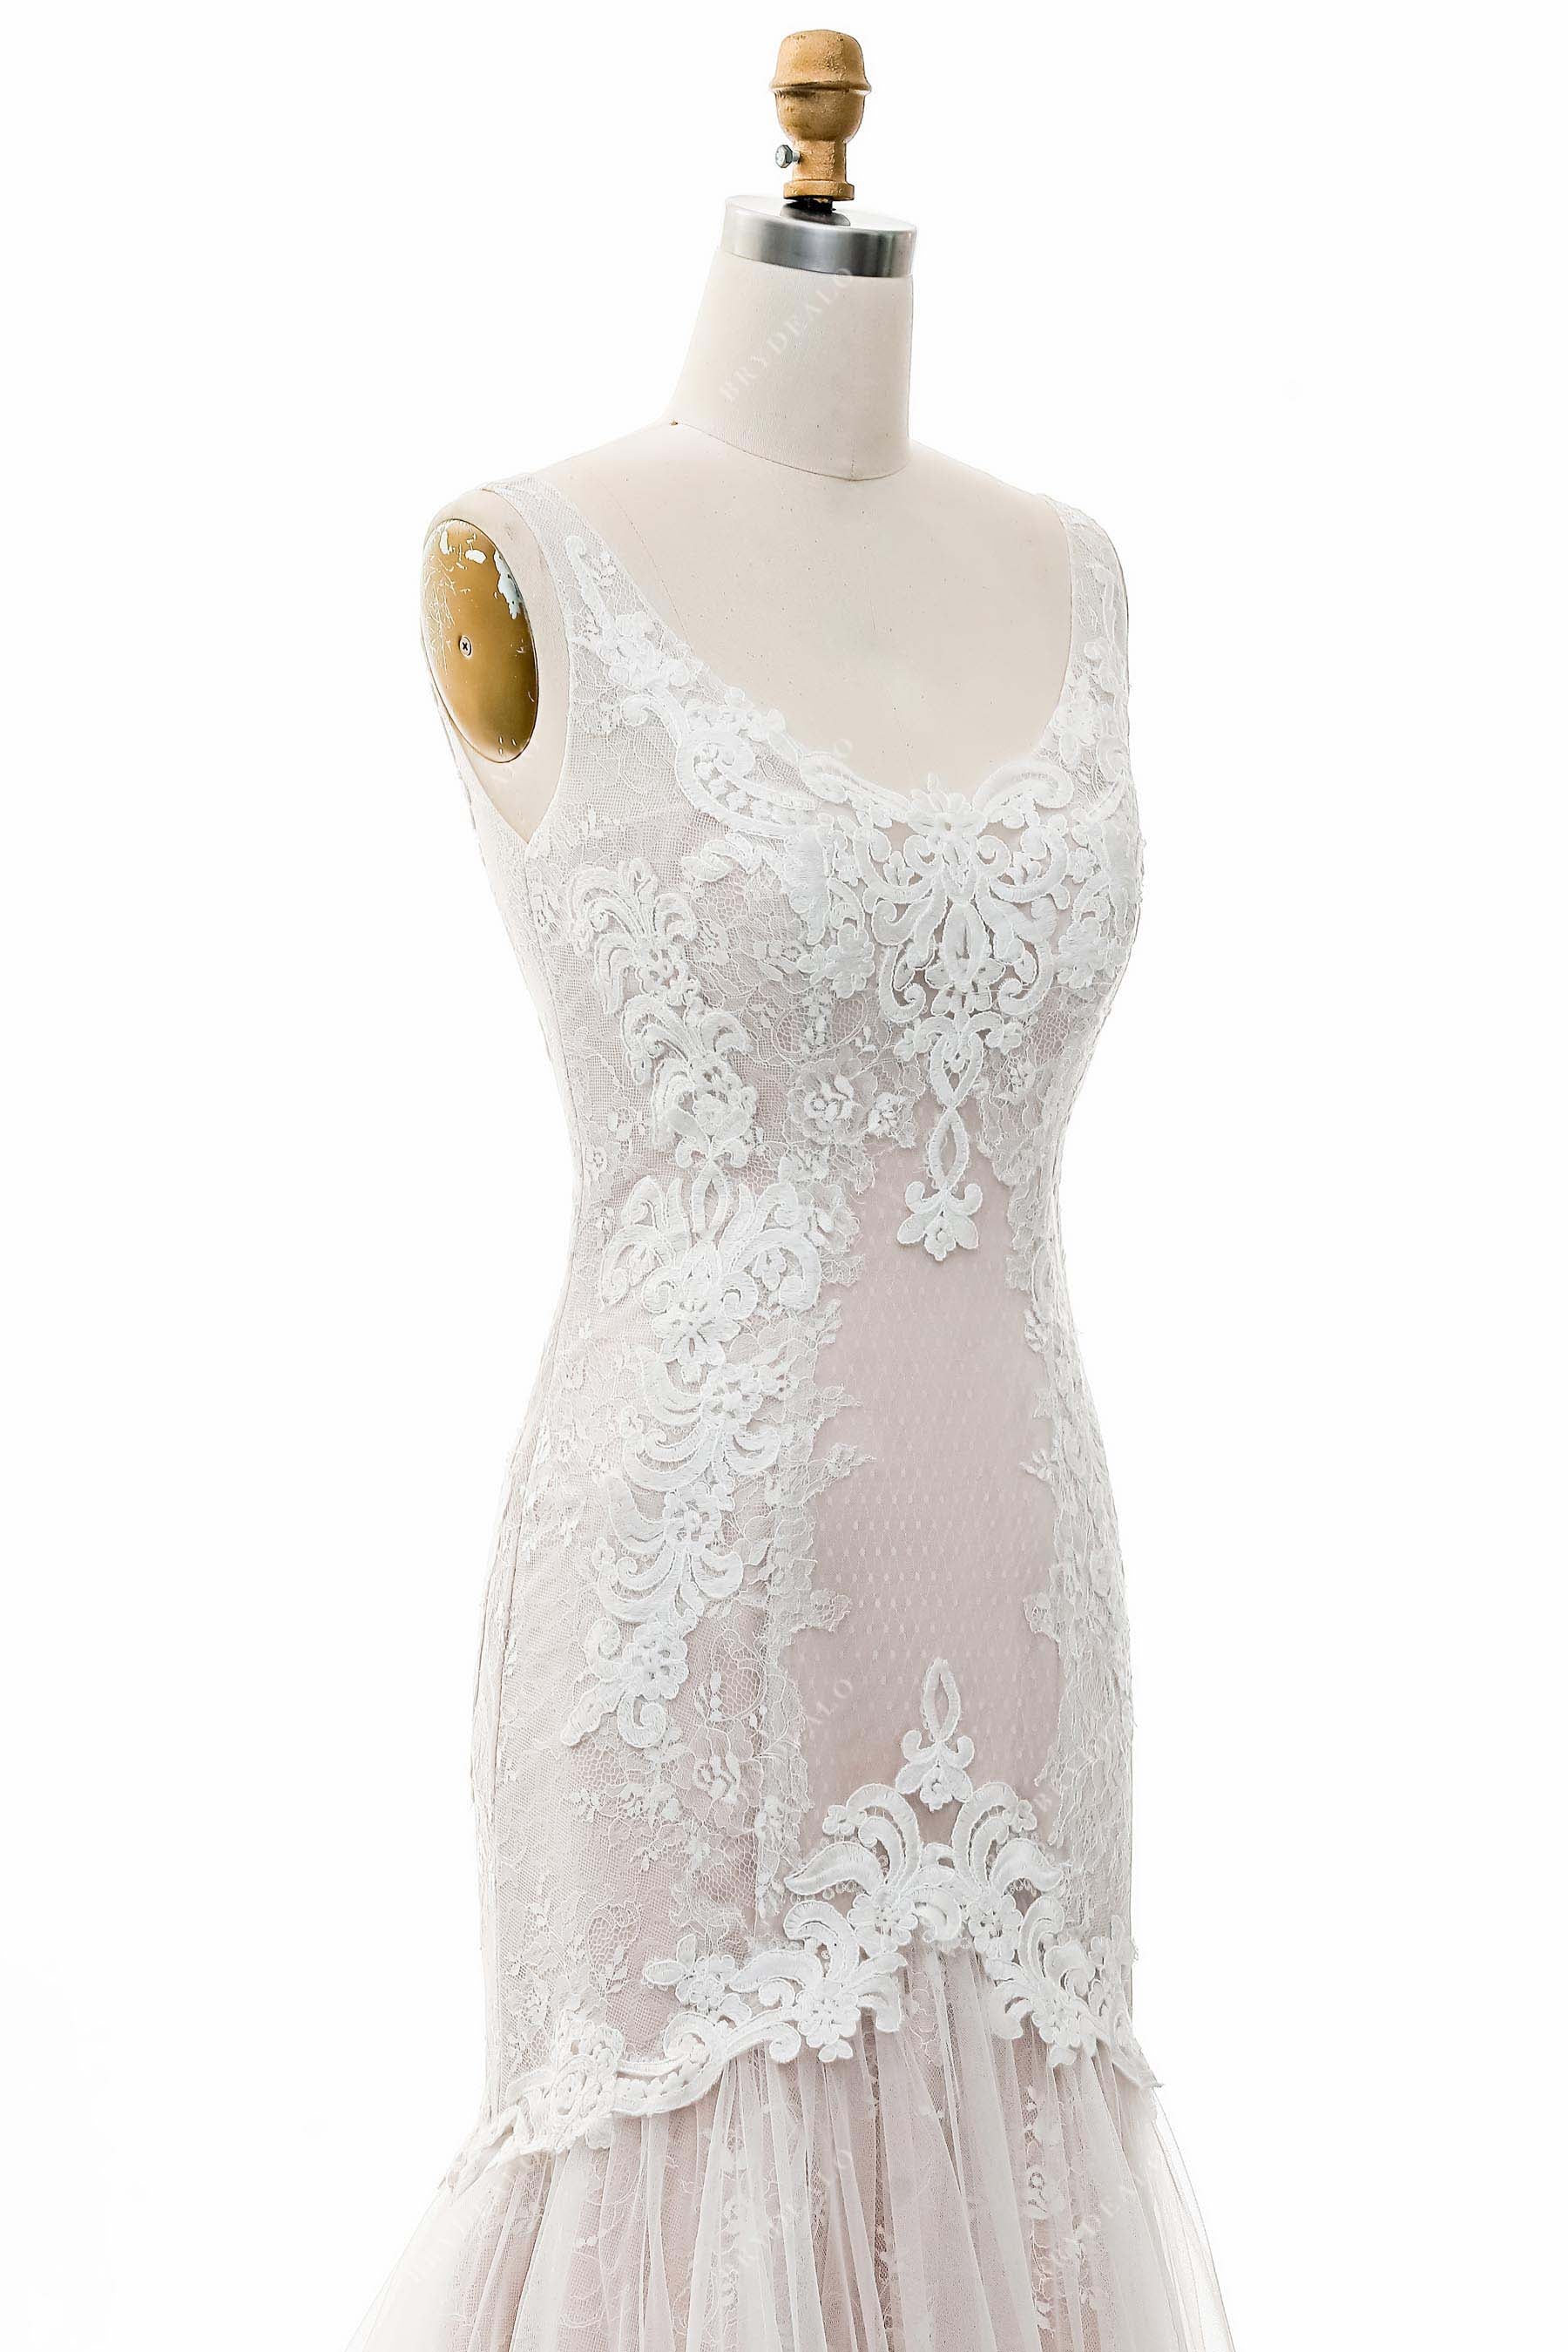 Sleeveless Scoop Neck Beaded Lace Bridal Gown